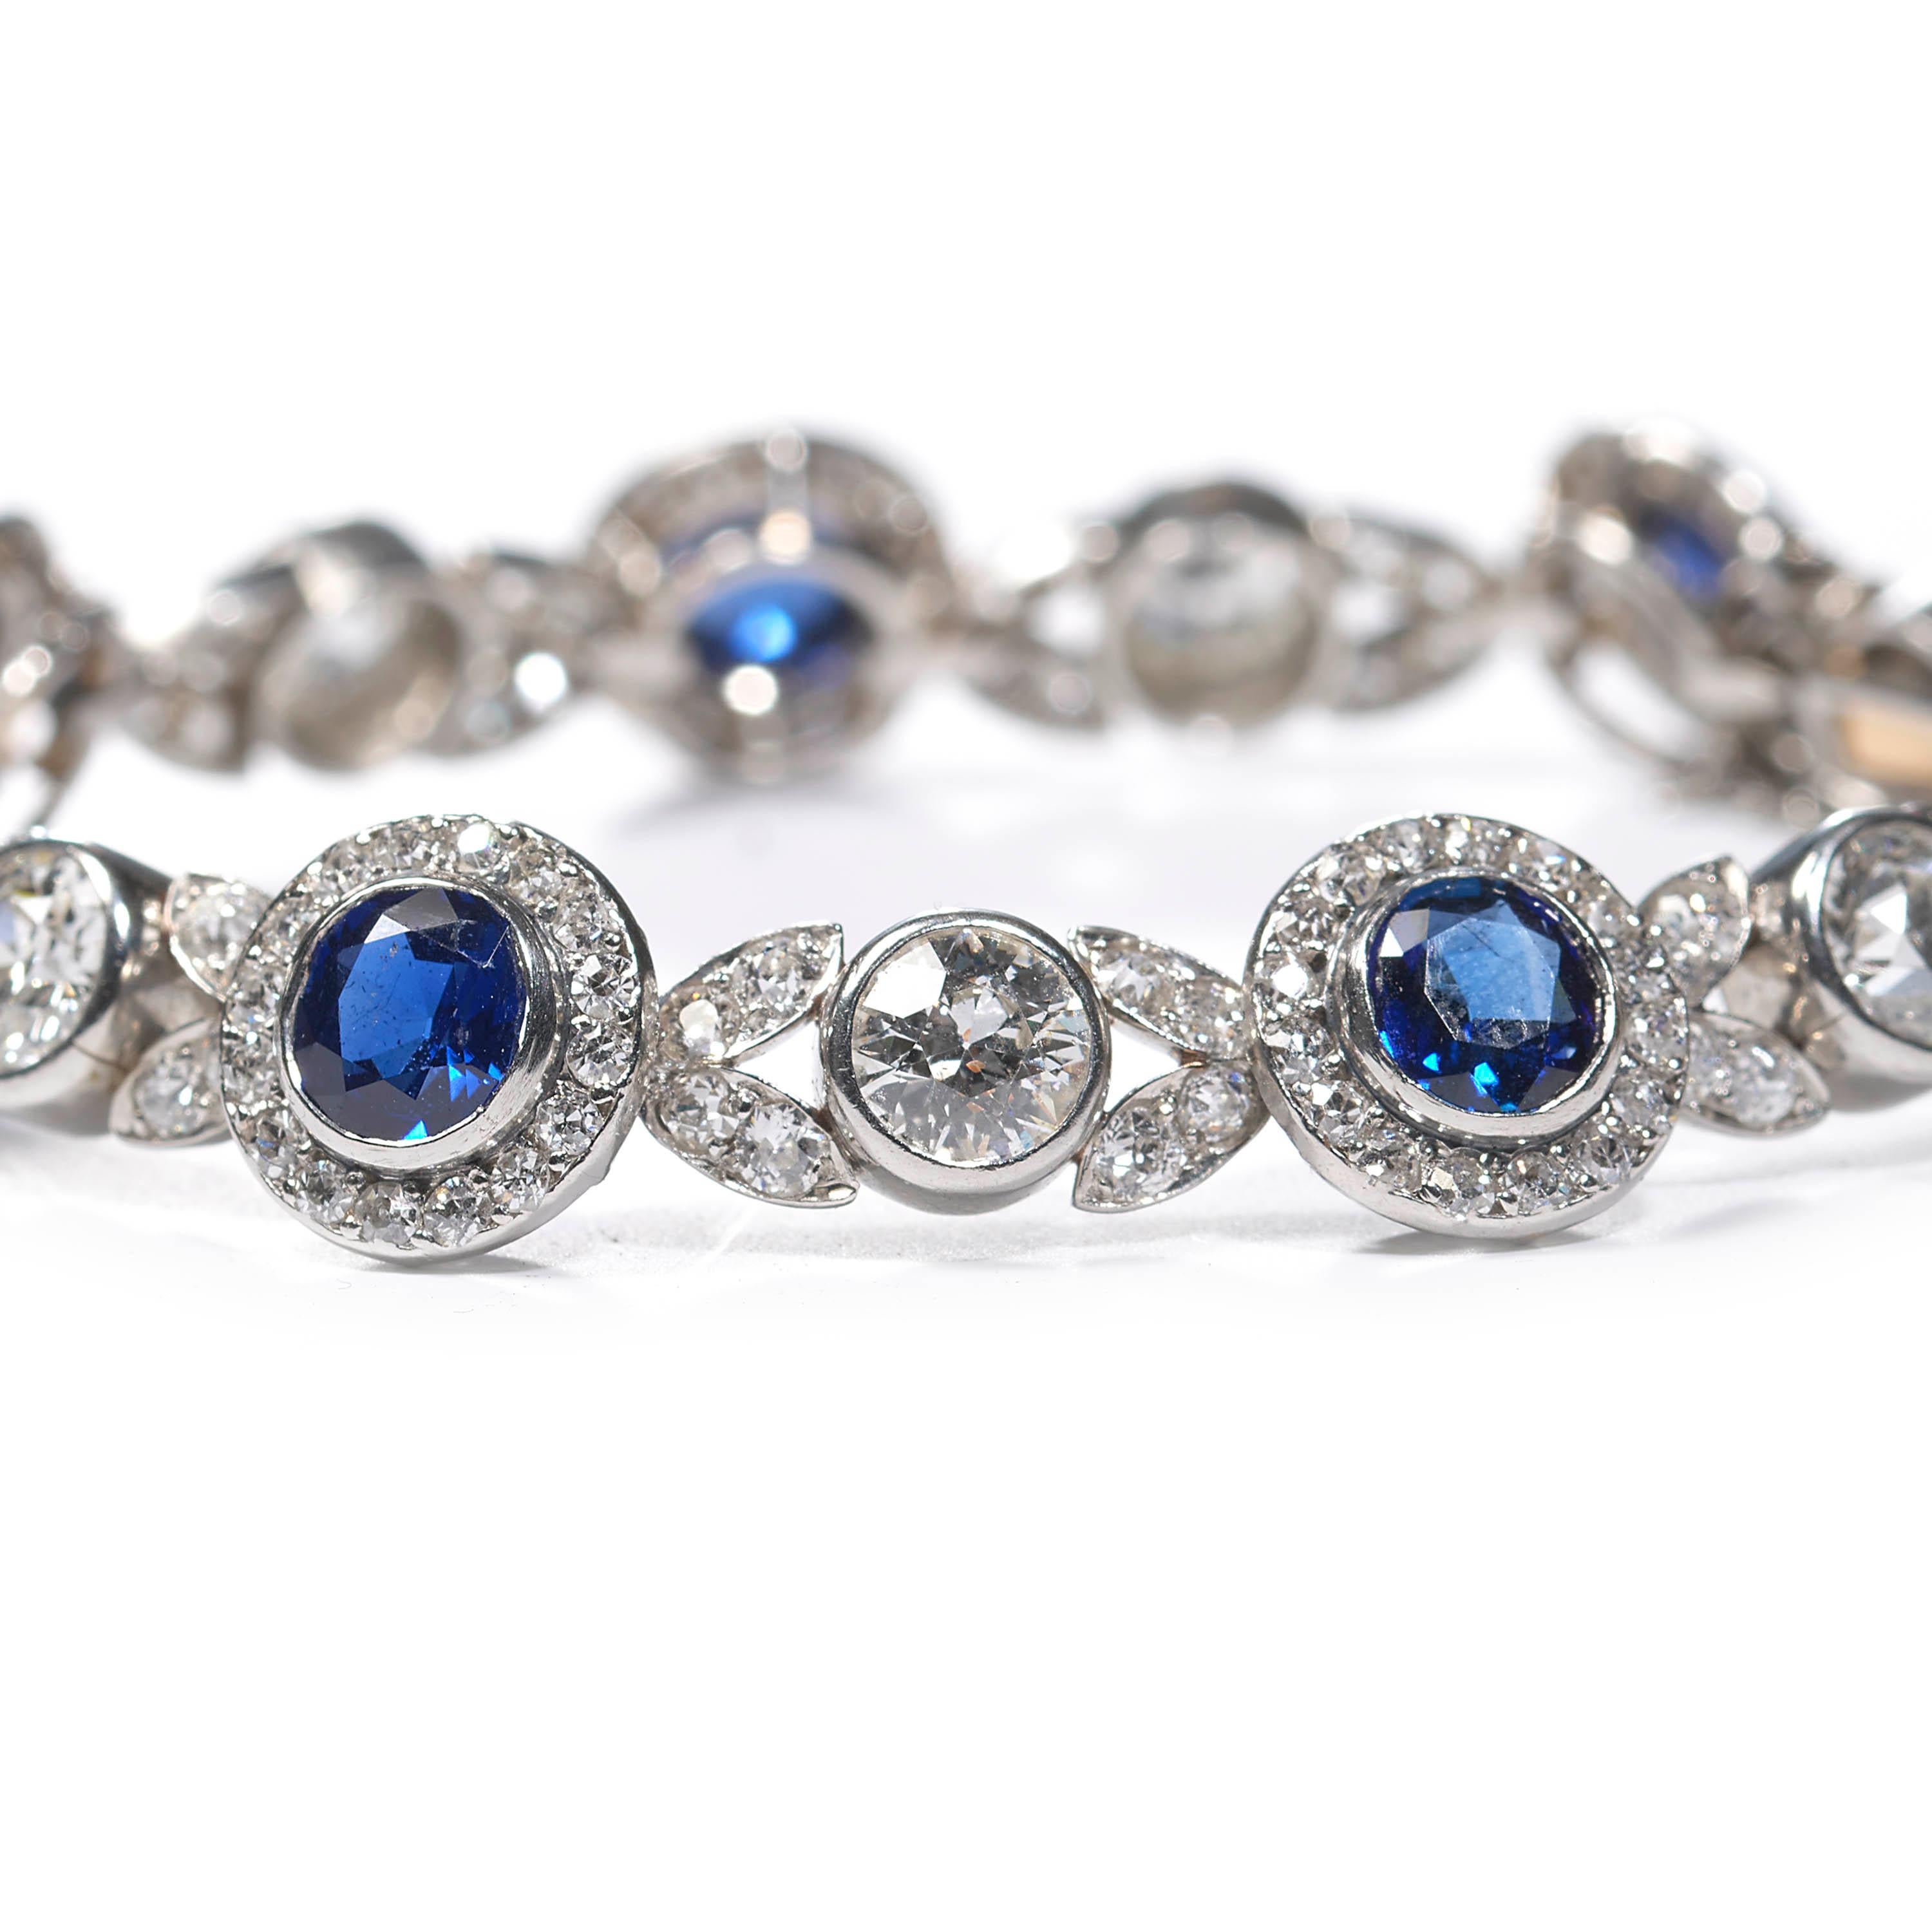 An antique Burmese sapphire and diamond bracelet, comprised of round Burmese sapphire and diamond clusters, connected by diamond-set leaf motifs, with a round old-cut diamond rub-over set in between each, all mounted in platinum. With a push-in